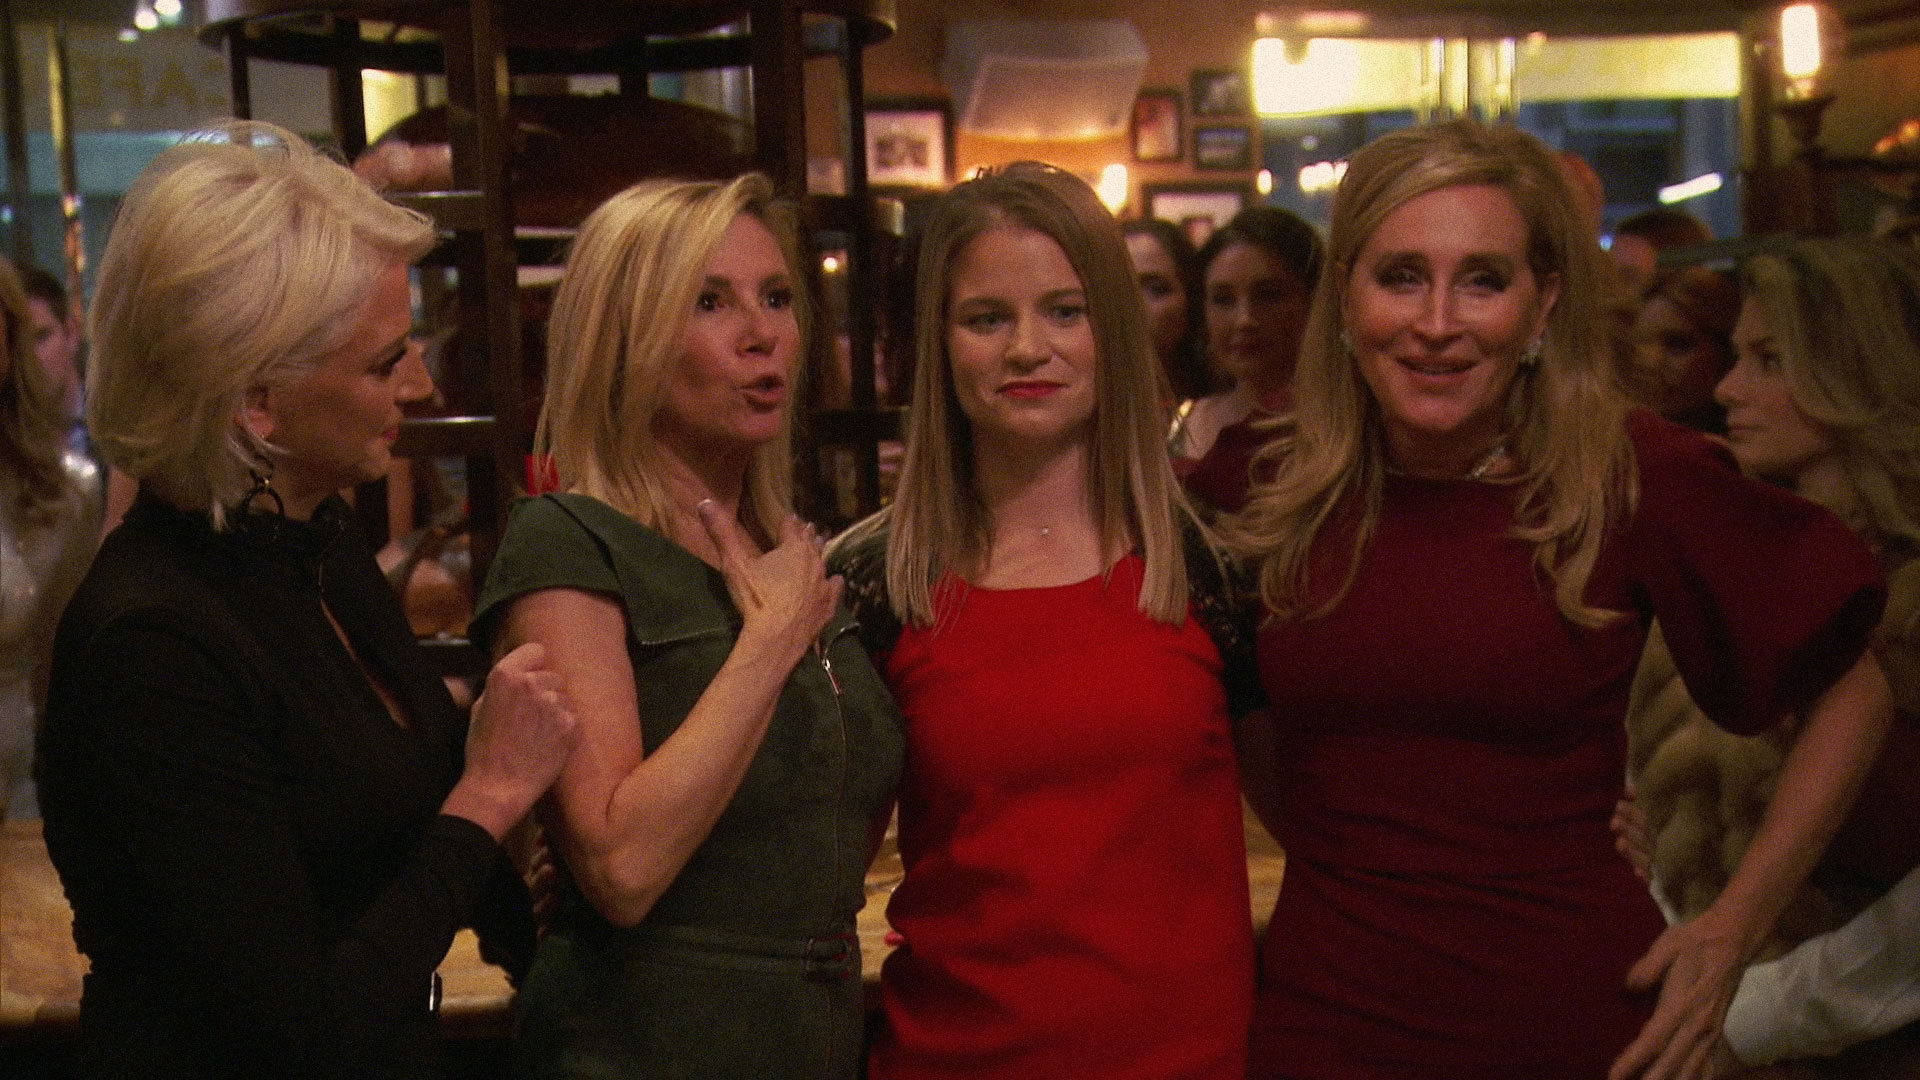 RHONY The Real Housewives of New York City S11E10 saison 11 épisode 10 Shalloween